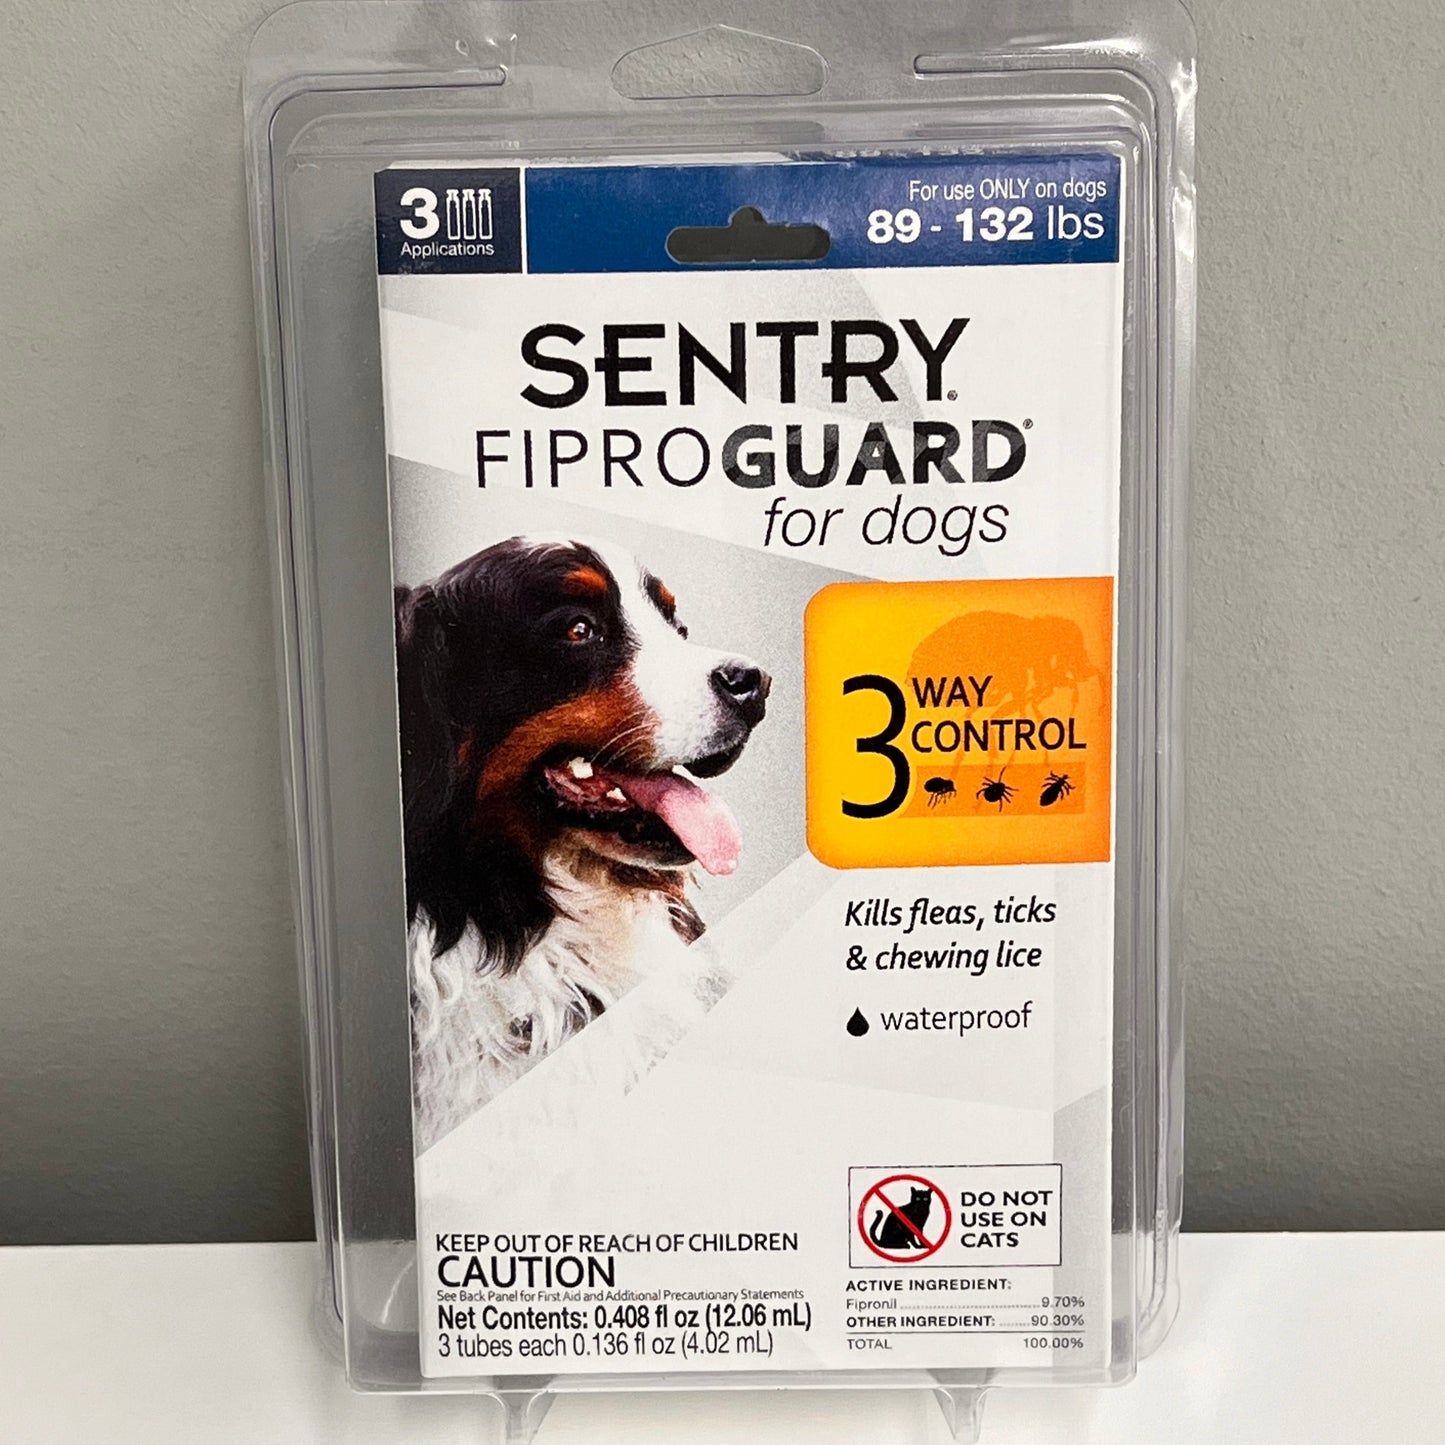 Sentry FiproGuard Flea & Tick Control for X-Large Dogs (89-132lbs)